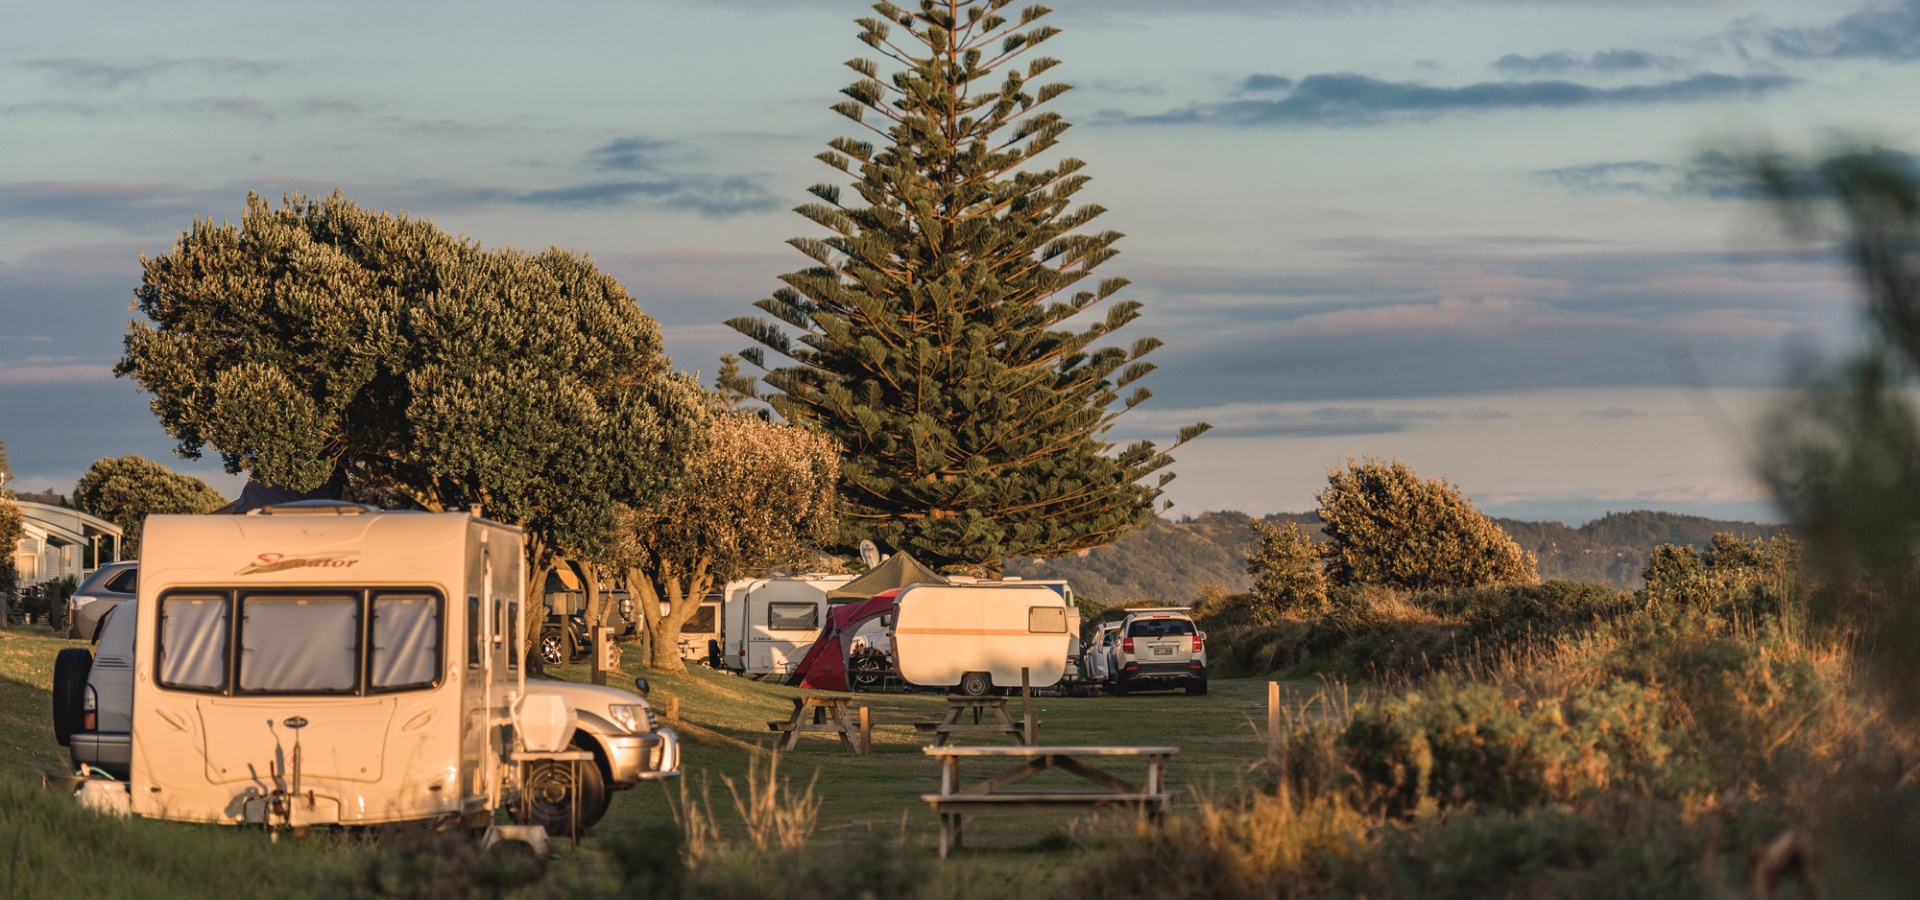 Award-winning Ōhope beach holiday park is the perfect backdrop for your next getaway.